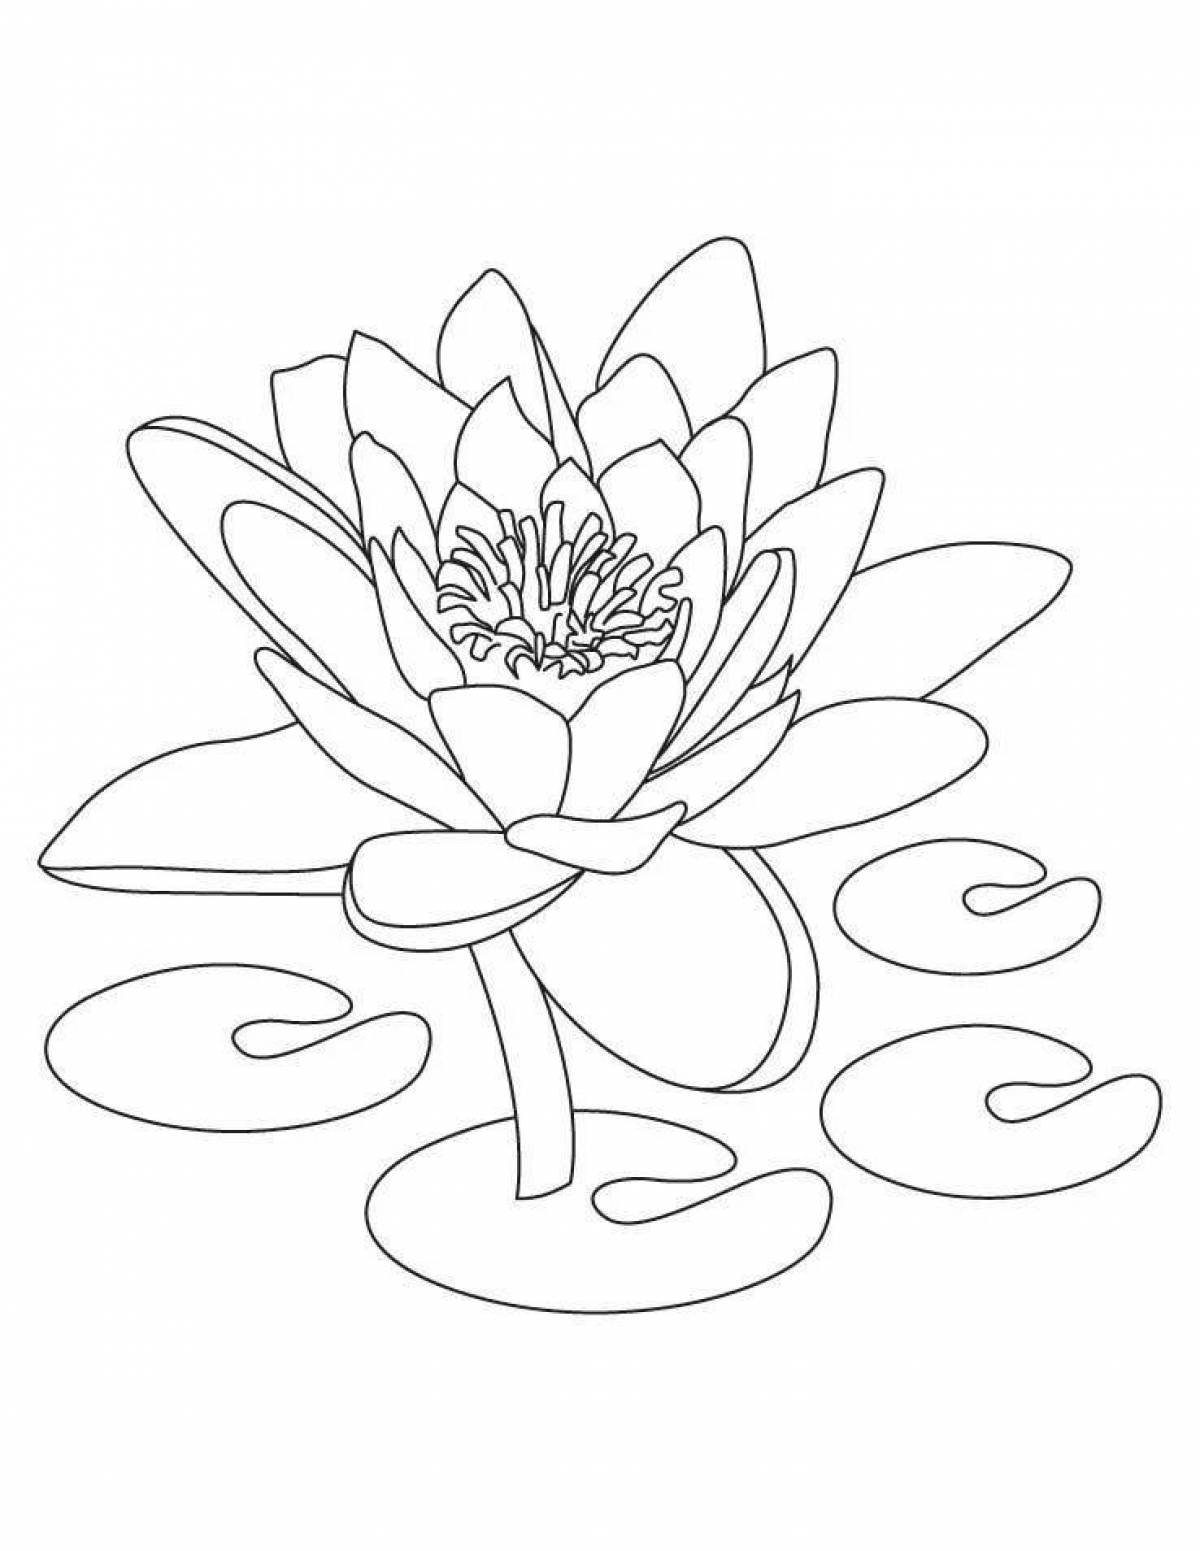 Beautiful water lily coloring page